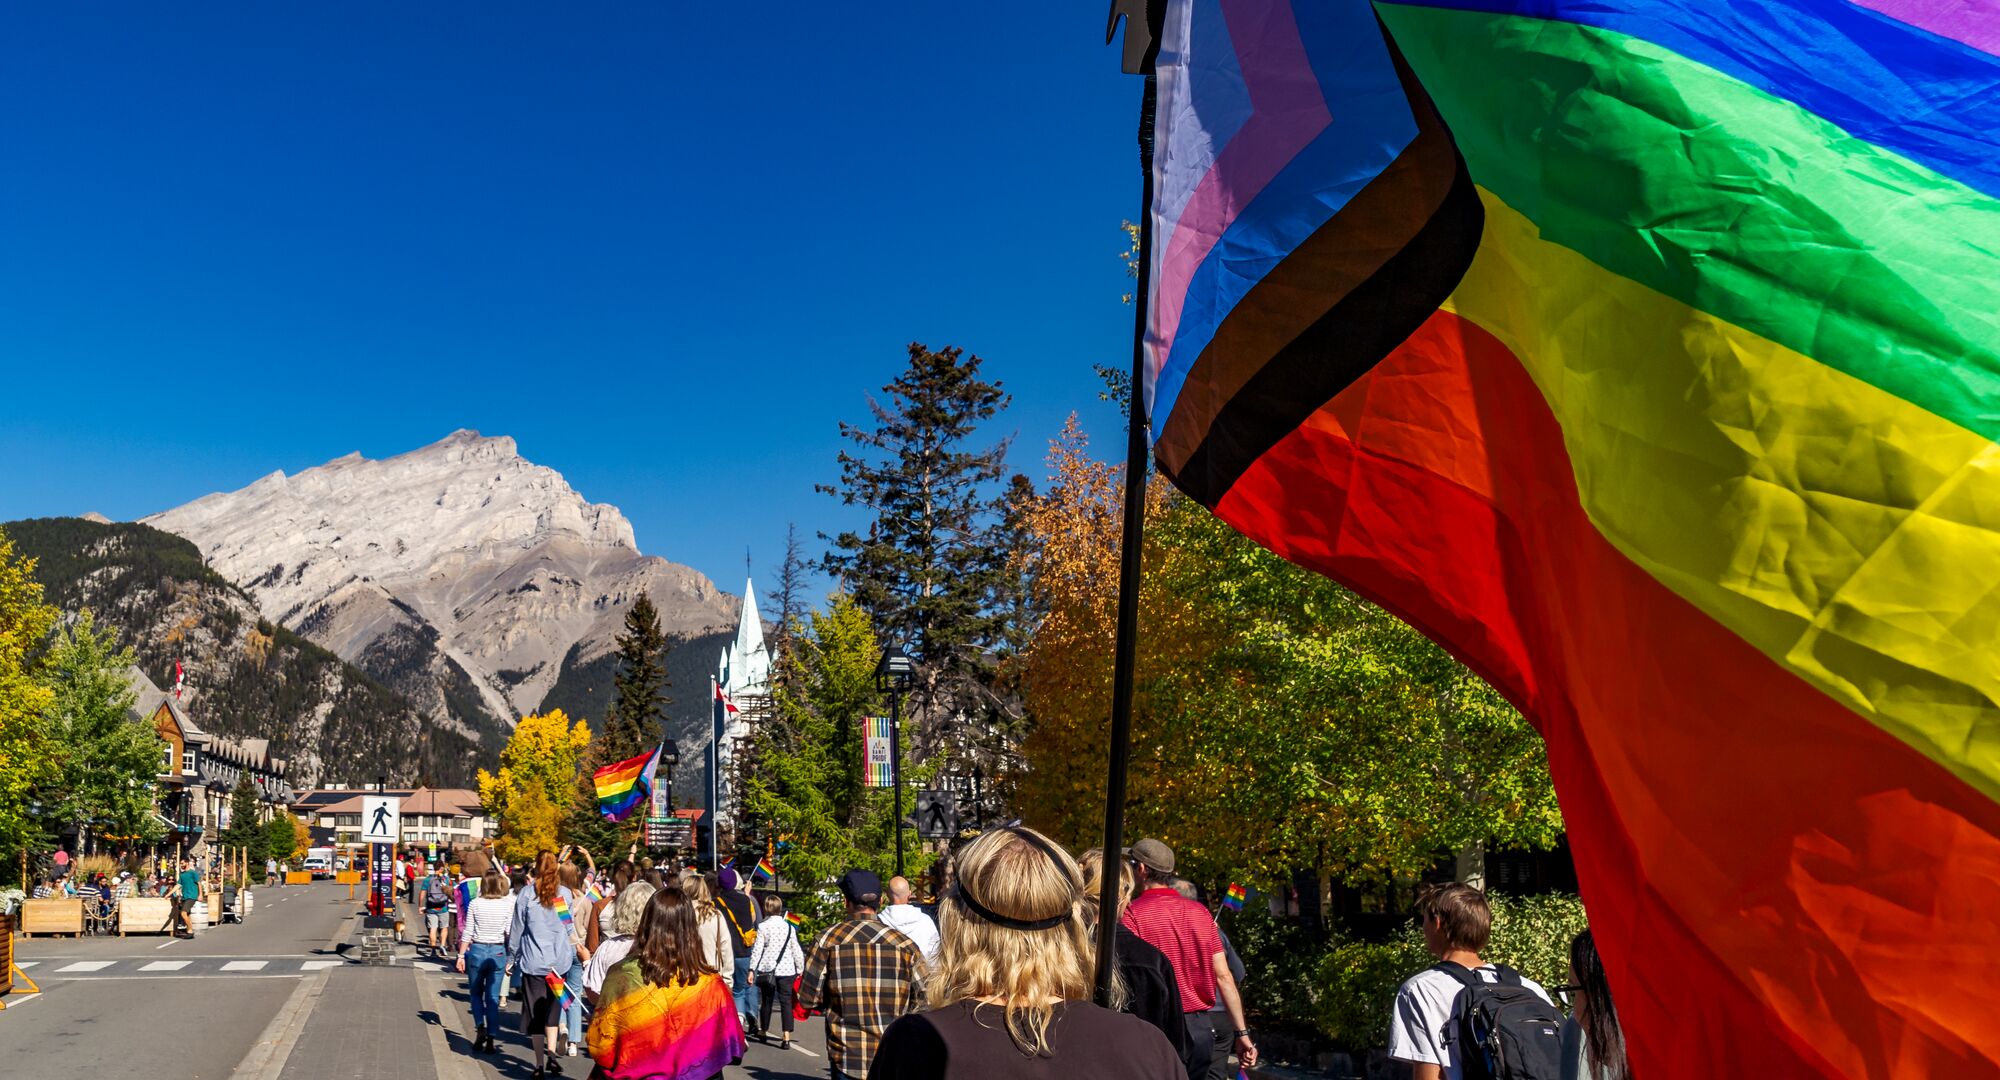 A pride flag in the Banff Pride parade on Banff Ave with Cascade Mountain in the background.